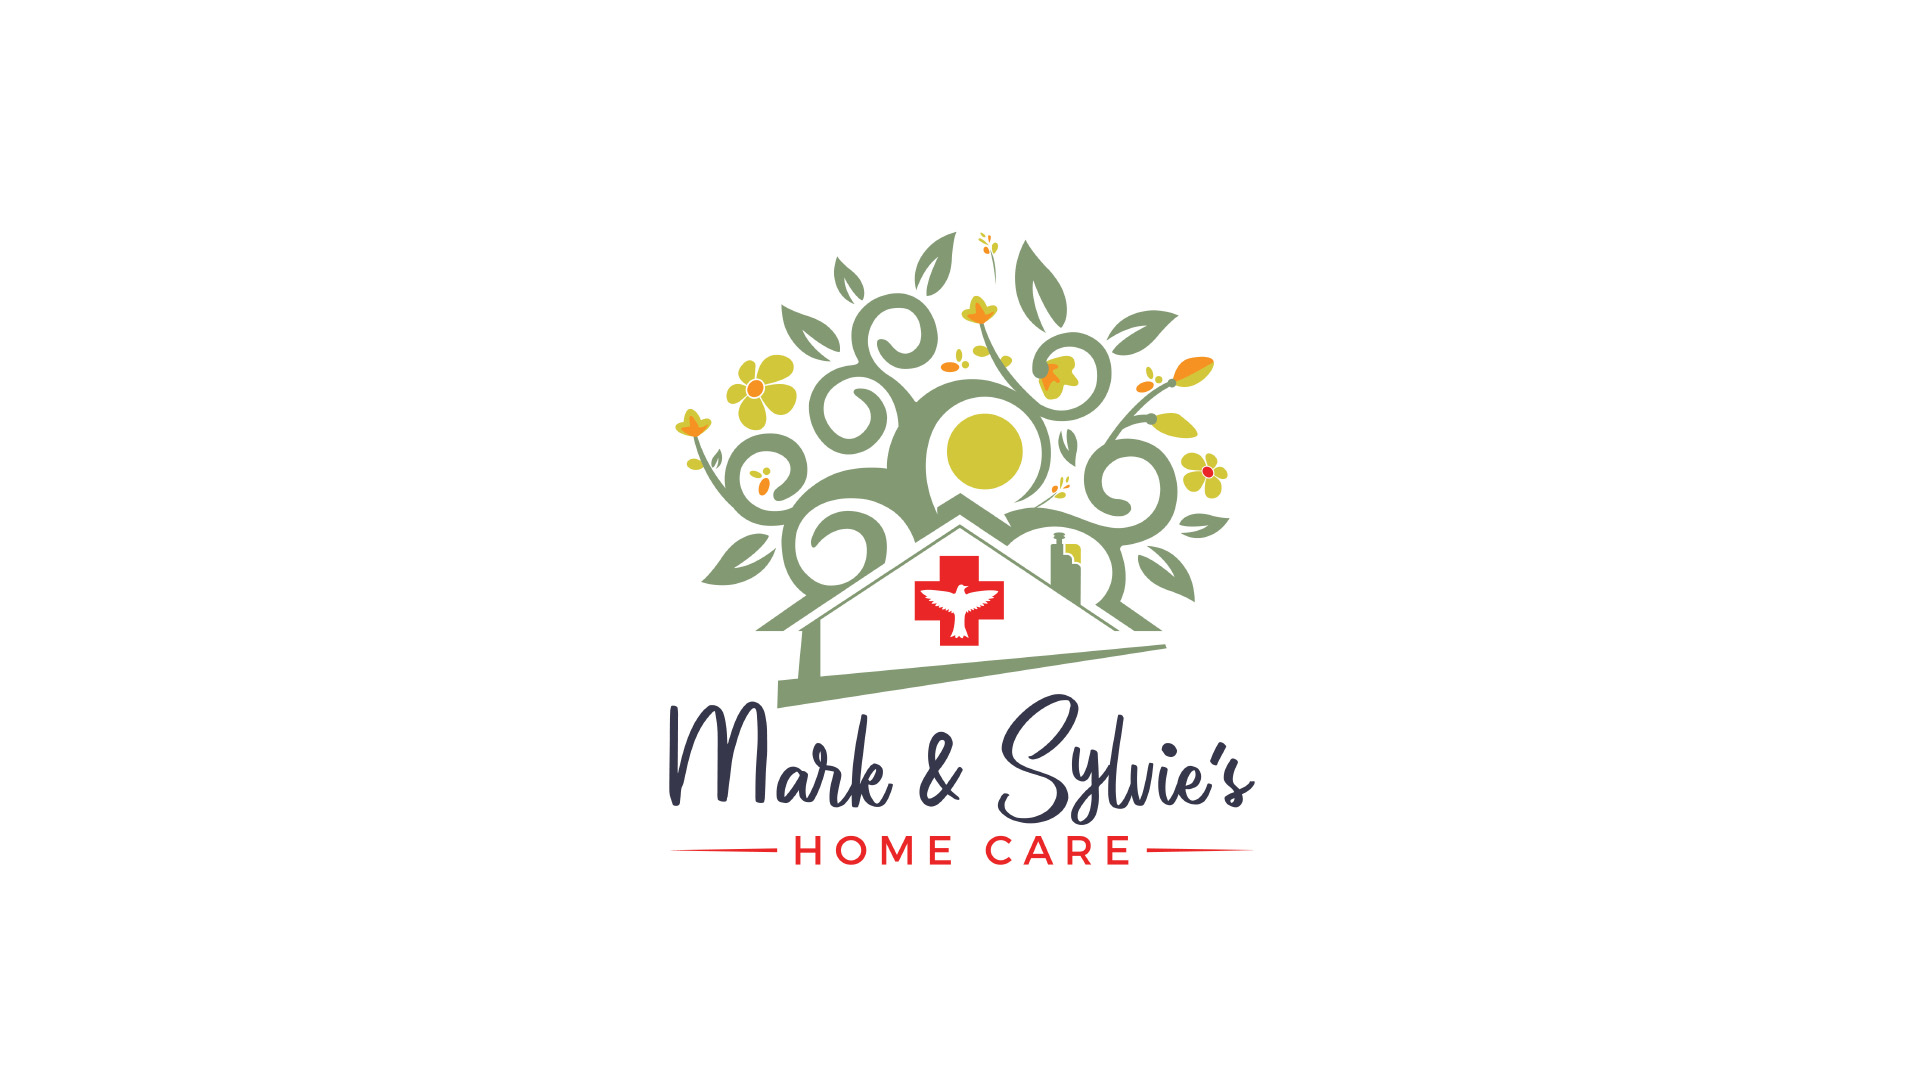 Our In-House Home Care – Mark & Sylvie’s Home Care